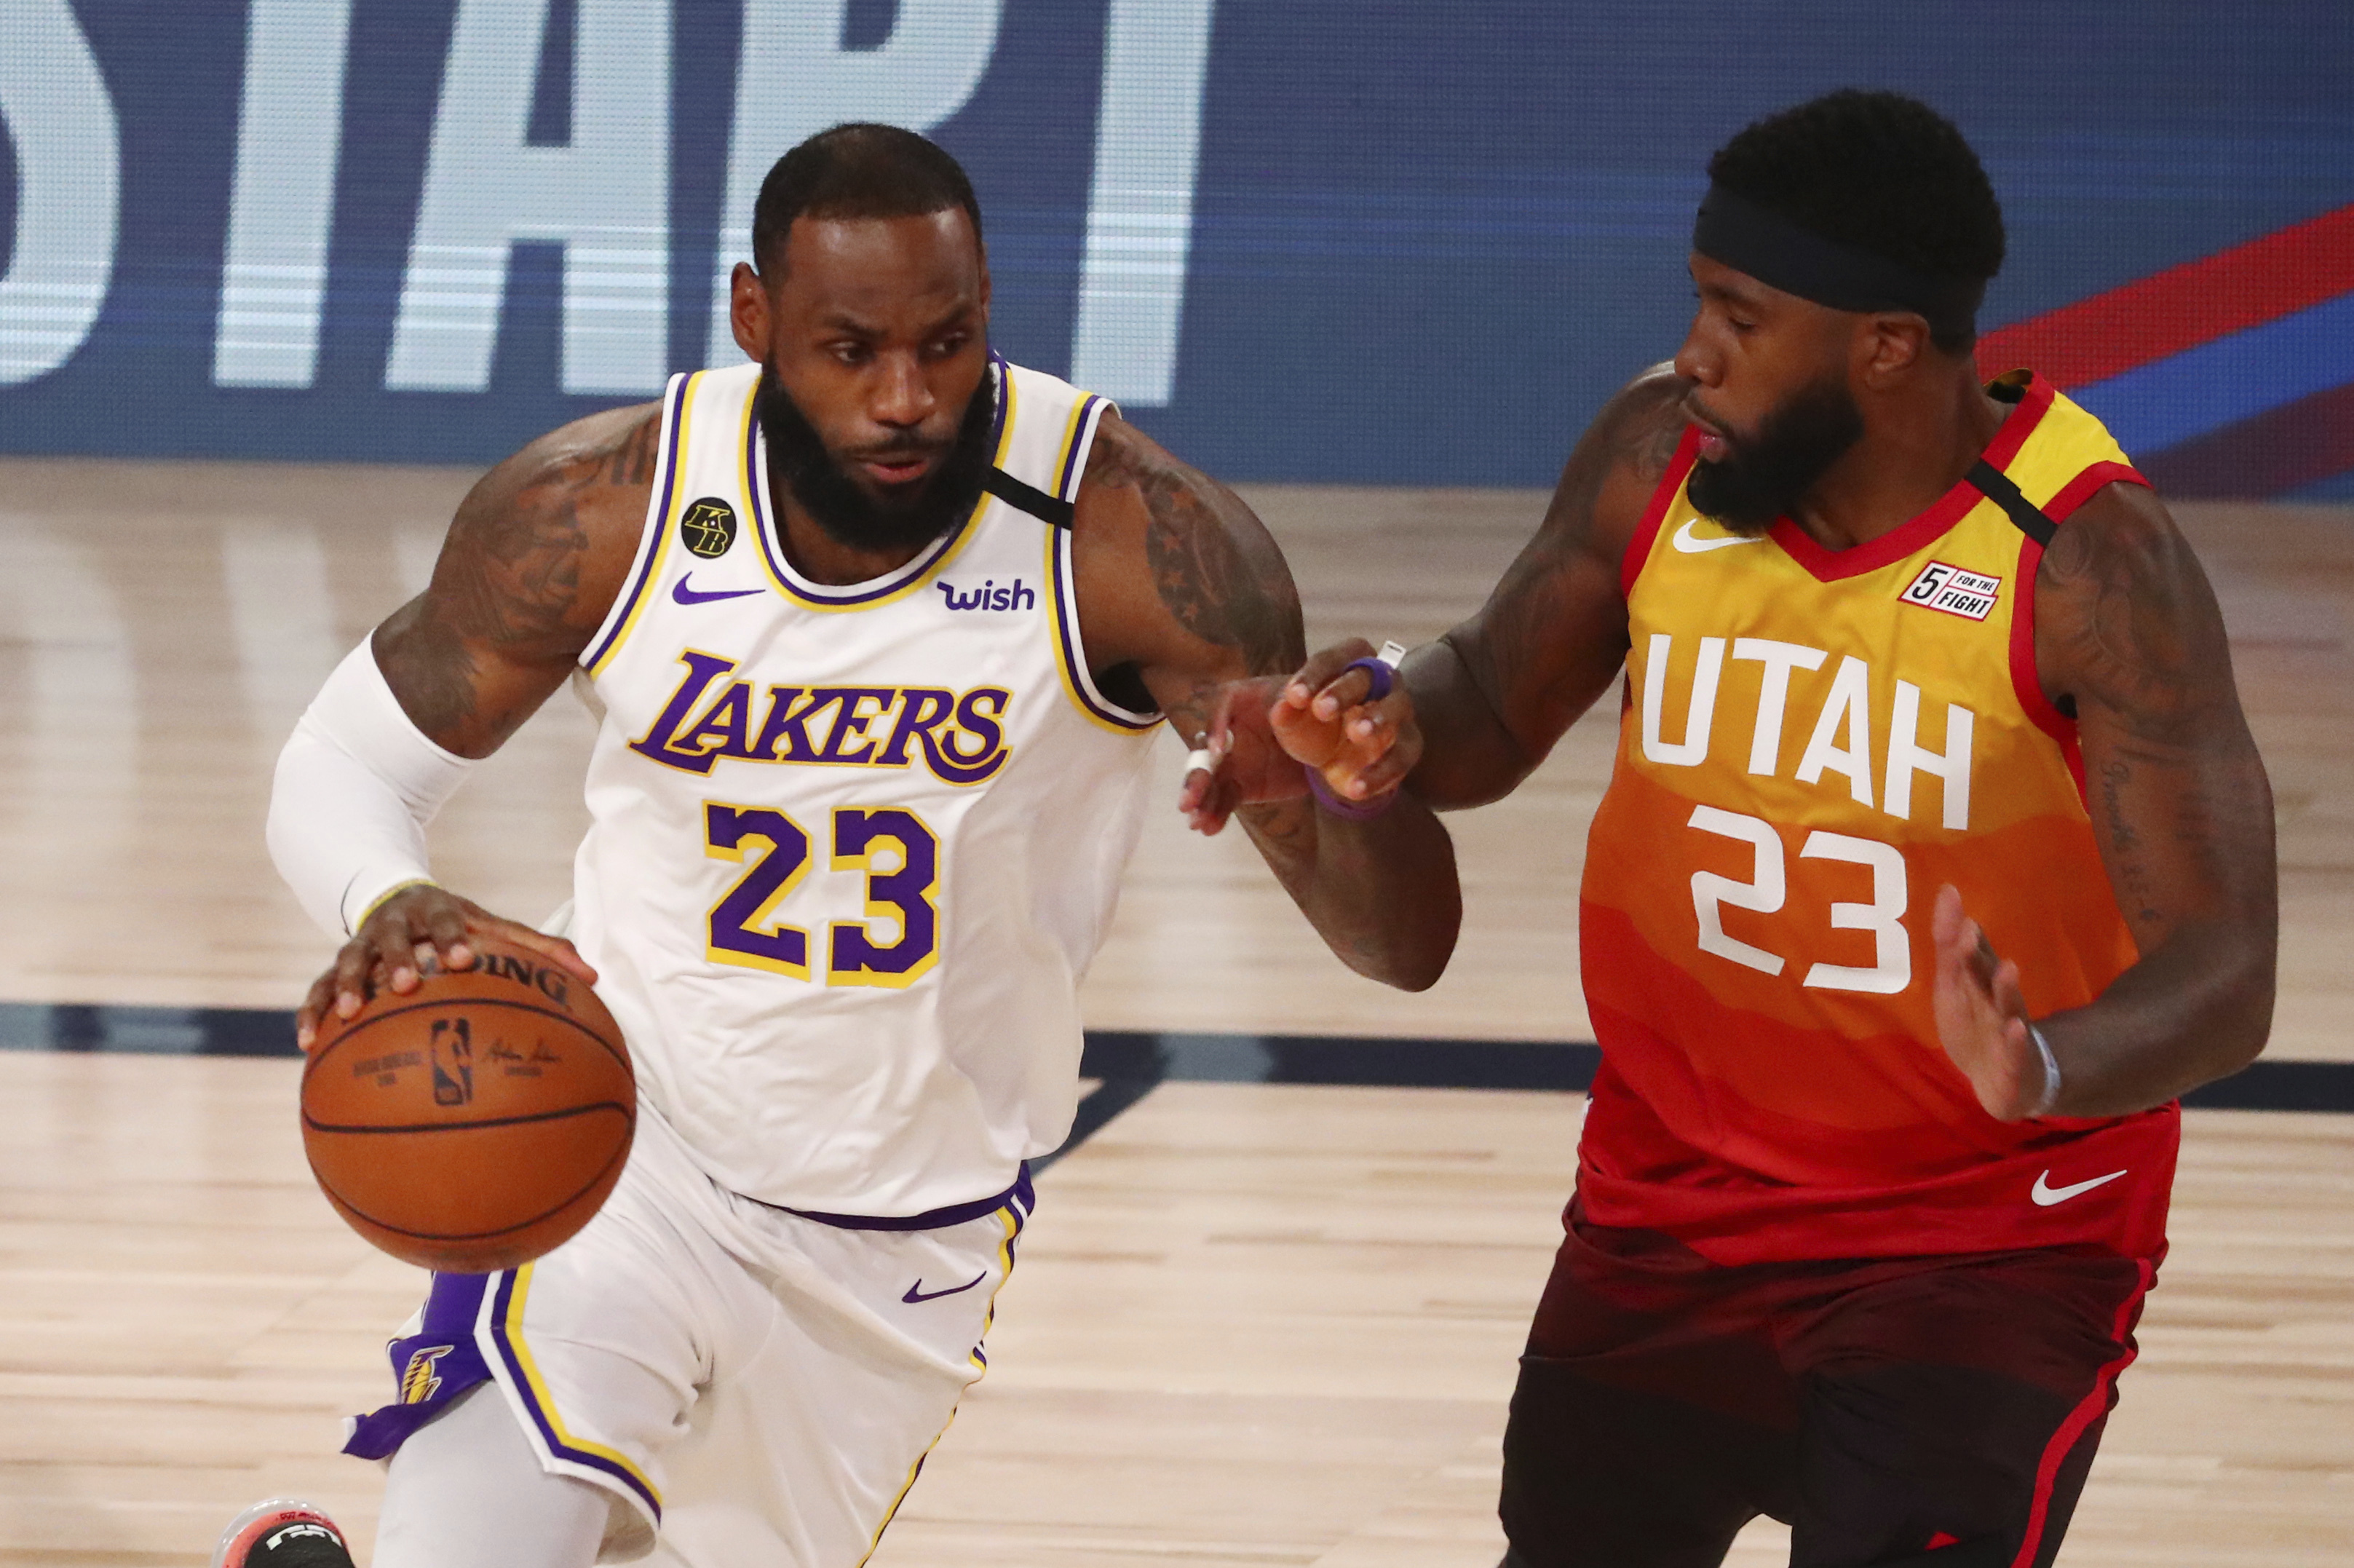 Utah Jazz vs Los Angeles Lakers free live stream, score updates, time, TV channel, how to watch online (2/24/2021)